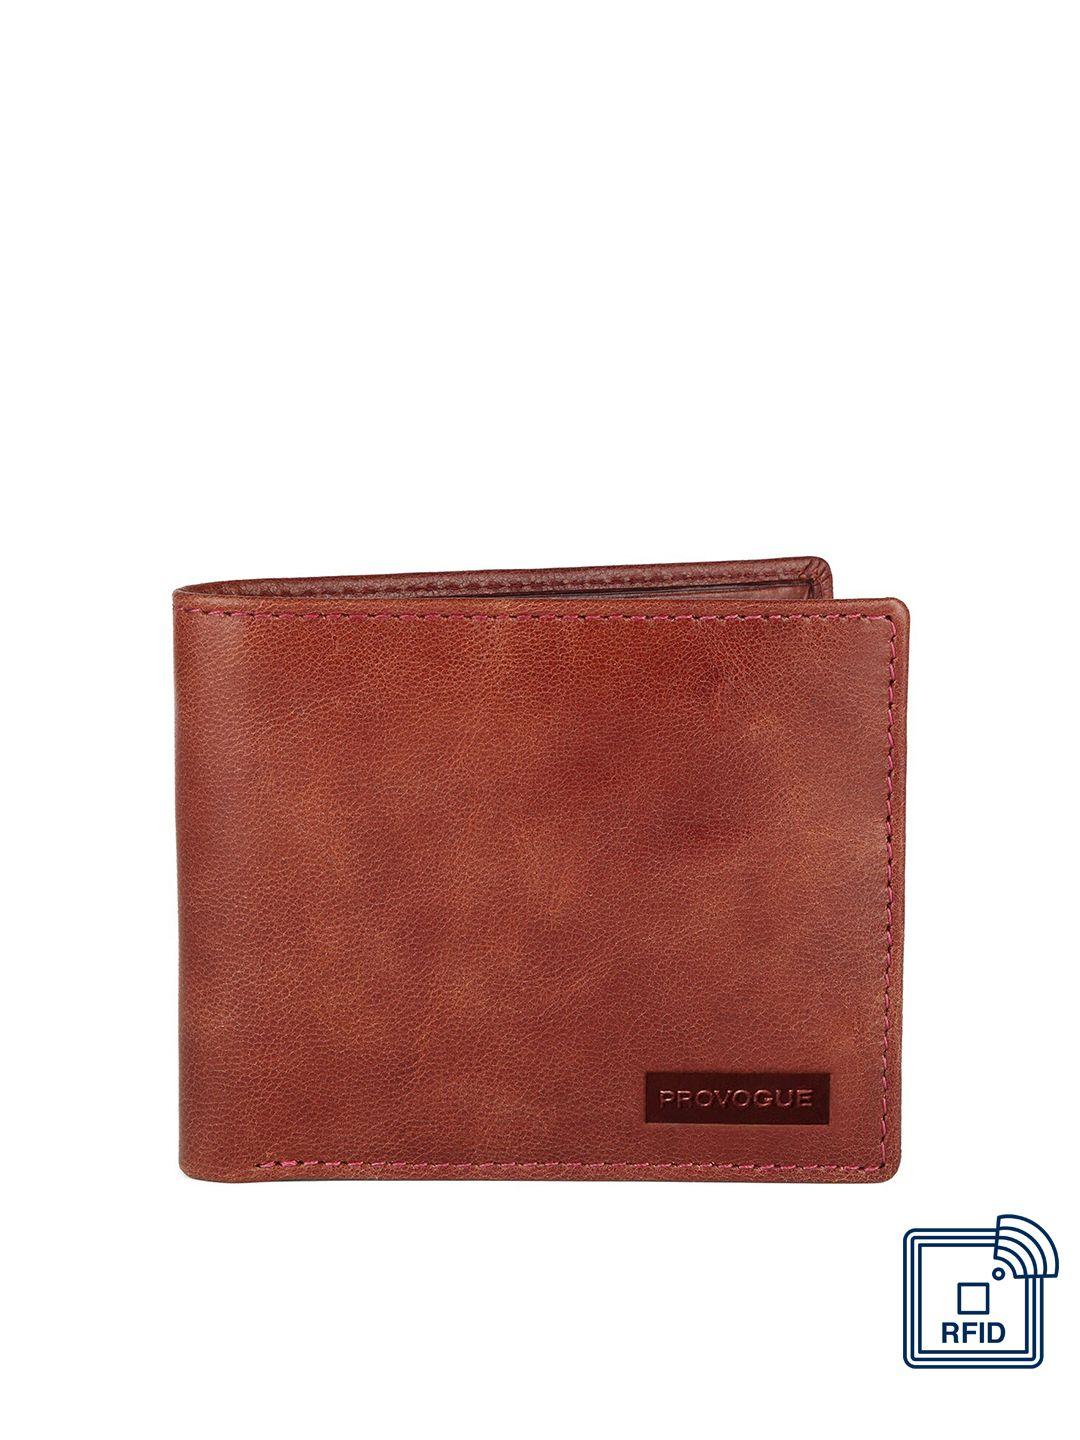 provogue men maroon textured leather two fold wallet